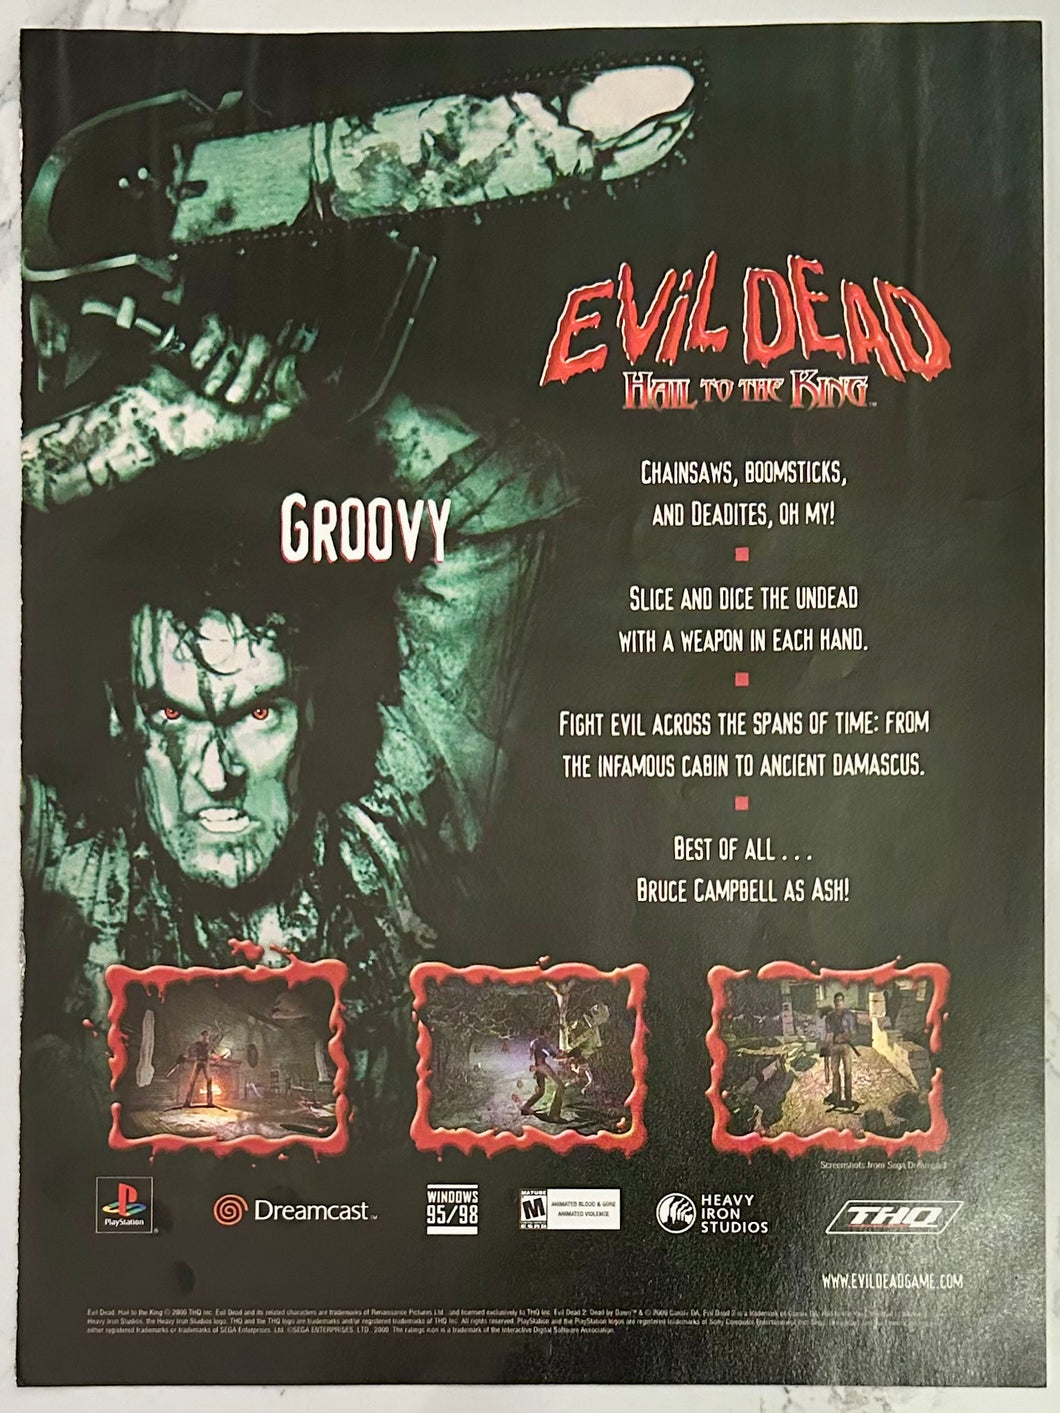 Evil Dead: Hail to the King - Dreamcast PlayStation - Original Vintage Advertisement - Print Ads - Laminated A4 Poster